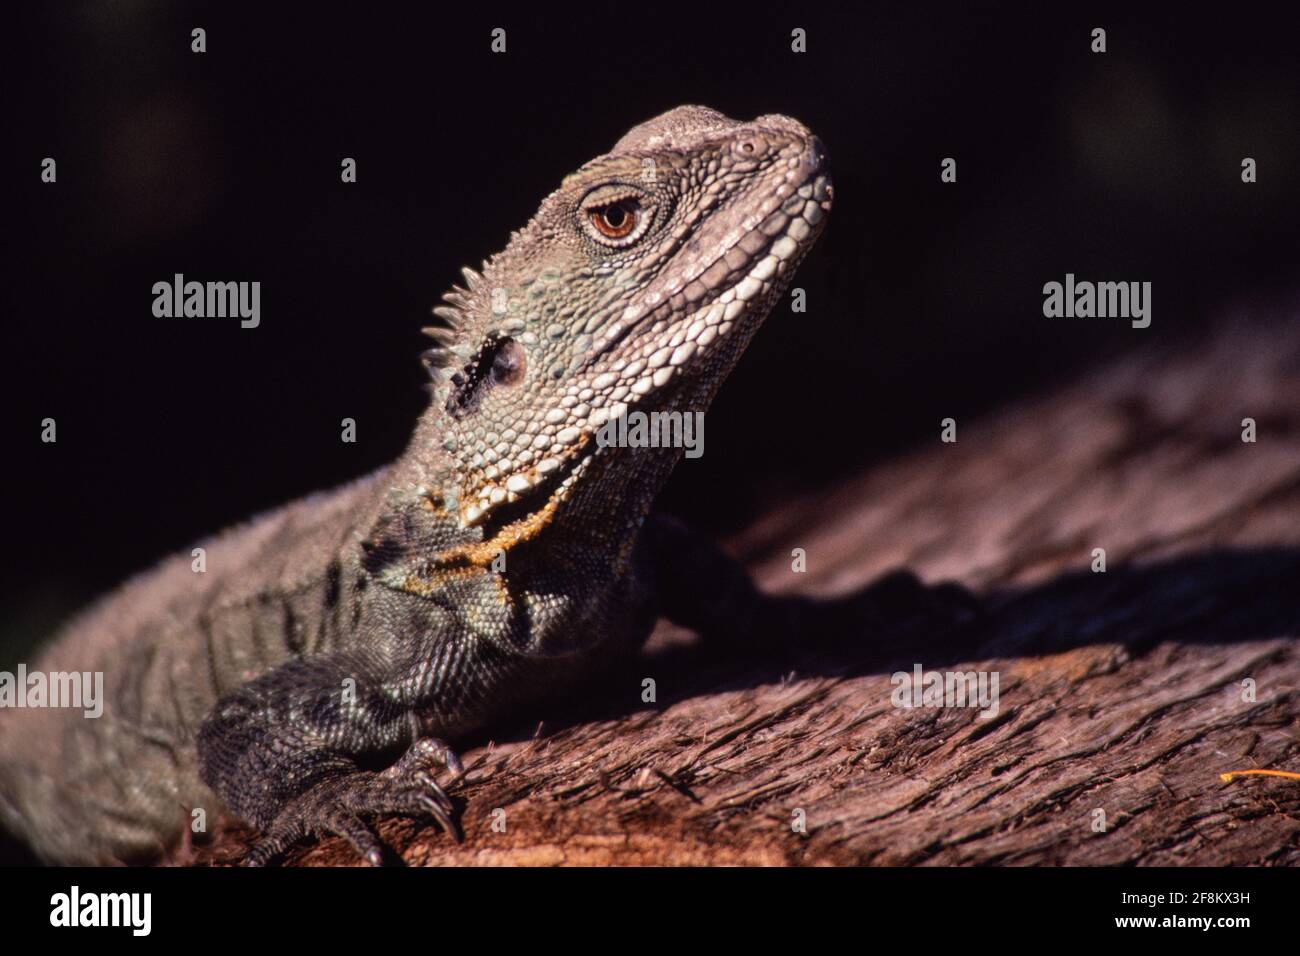 The Gippsland Water Dragon, Intellagama lesueurii howittii, is a subspecies of the Australian Water Dragon. Stock Photo